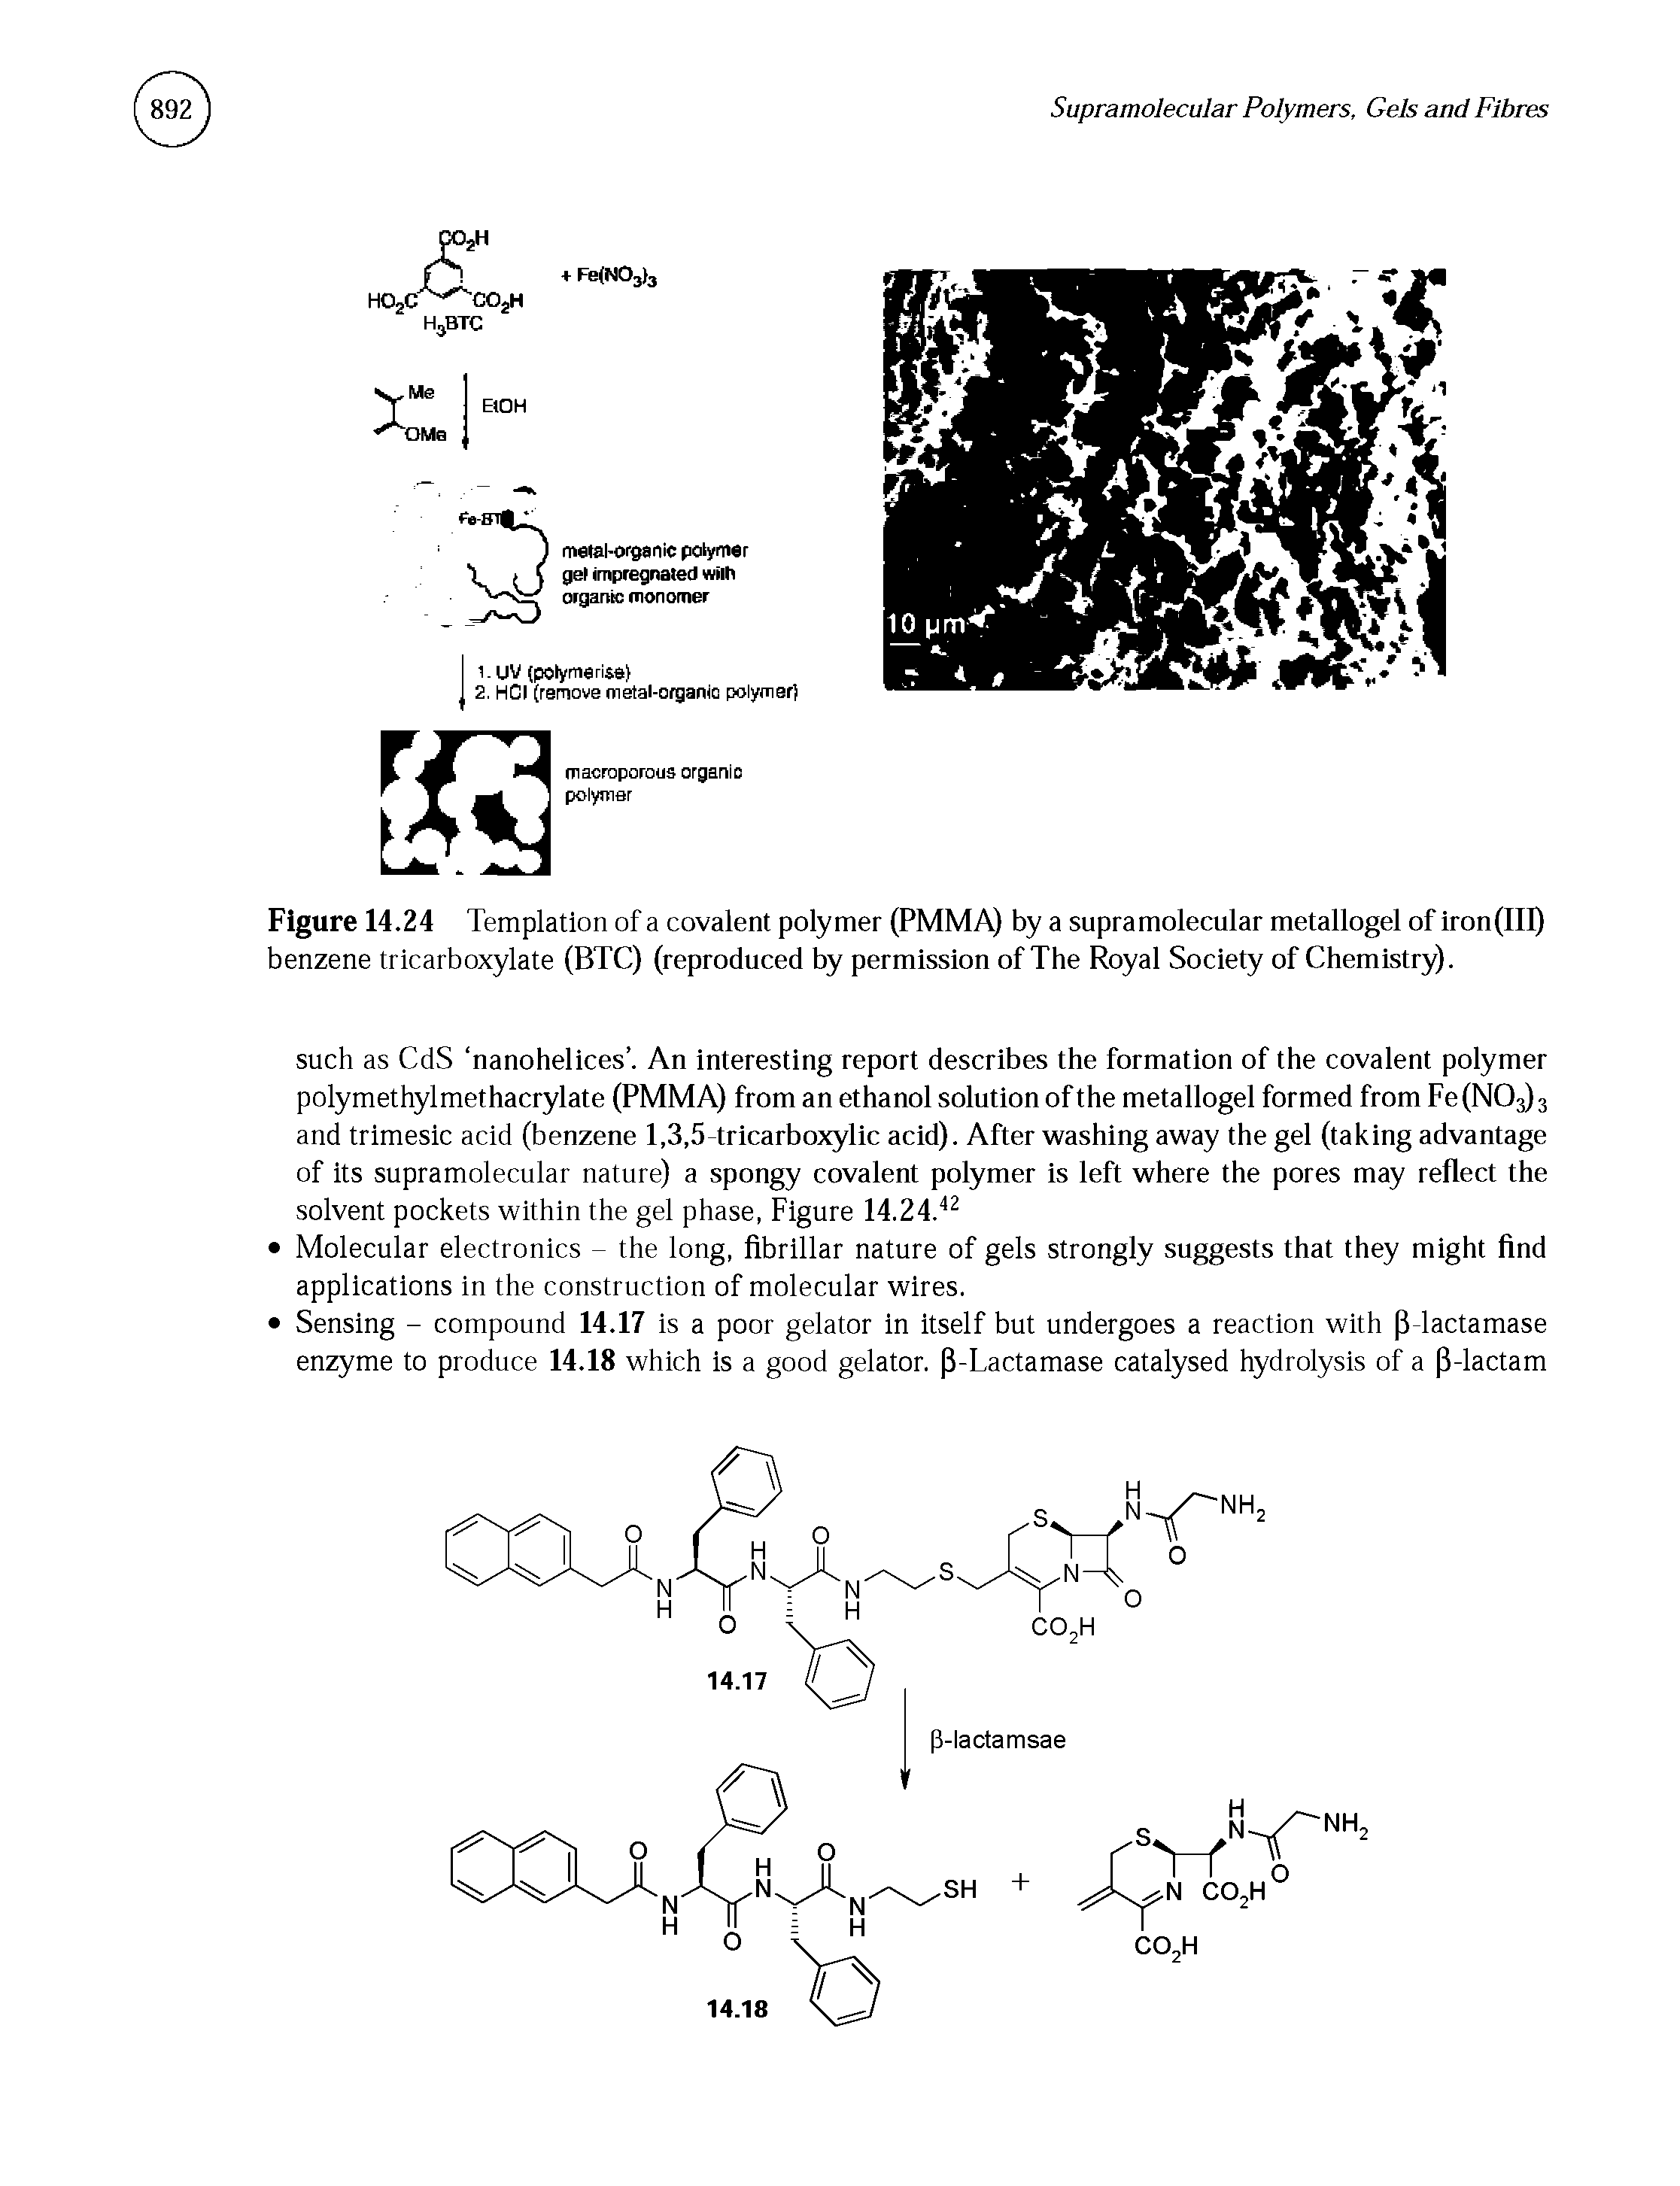 Figure 14.24 Templation of a covalent polymer (PMMA) by a supramolecular metallogel of iron(III) benzene tricarboxylate (BTC) (reproduced by permission of The Royal Society of Chemistry).